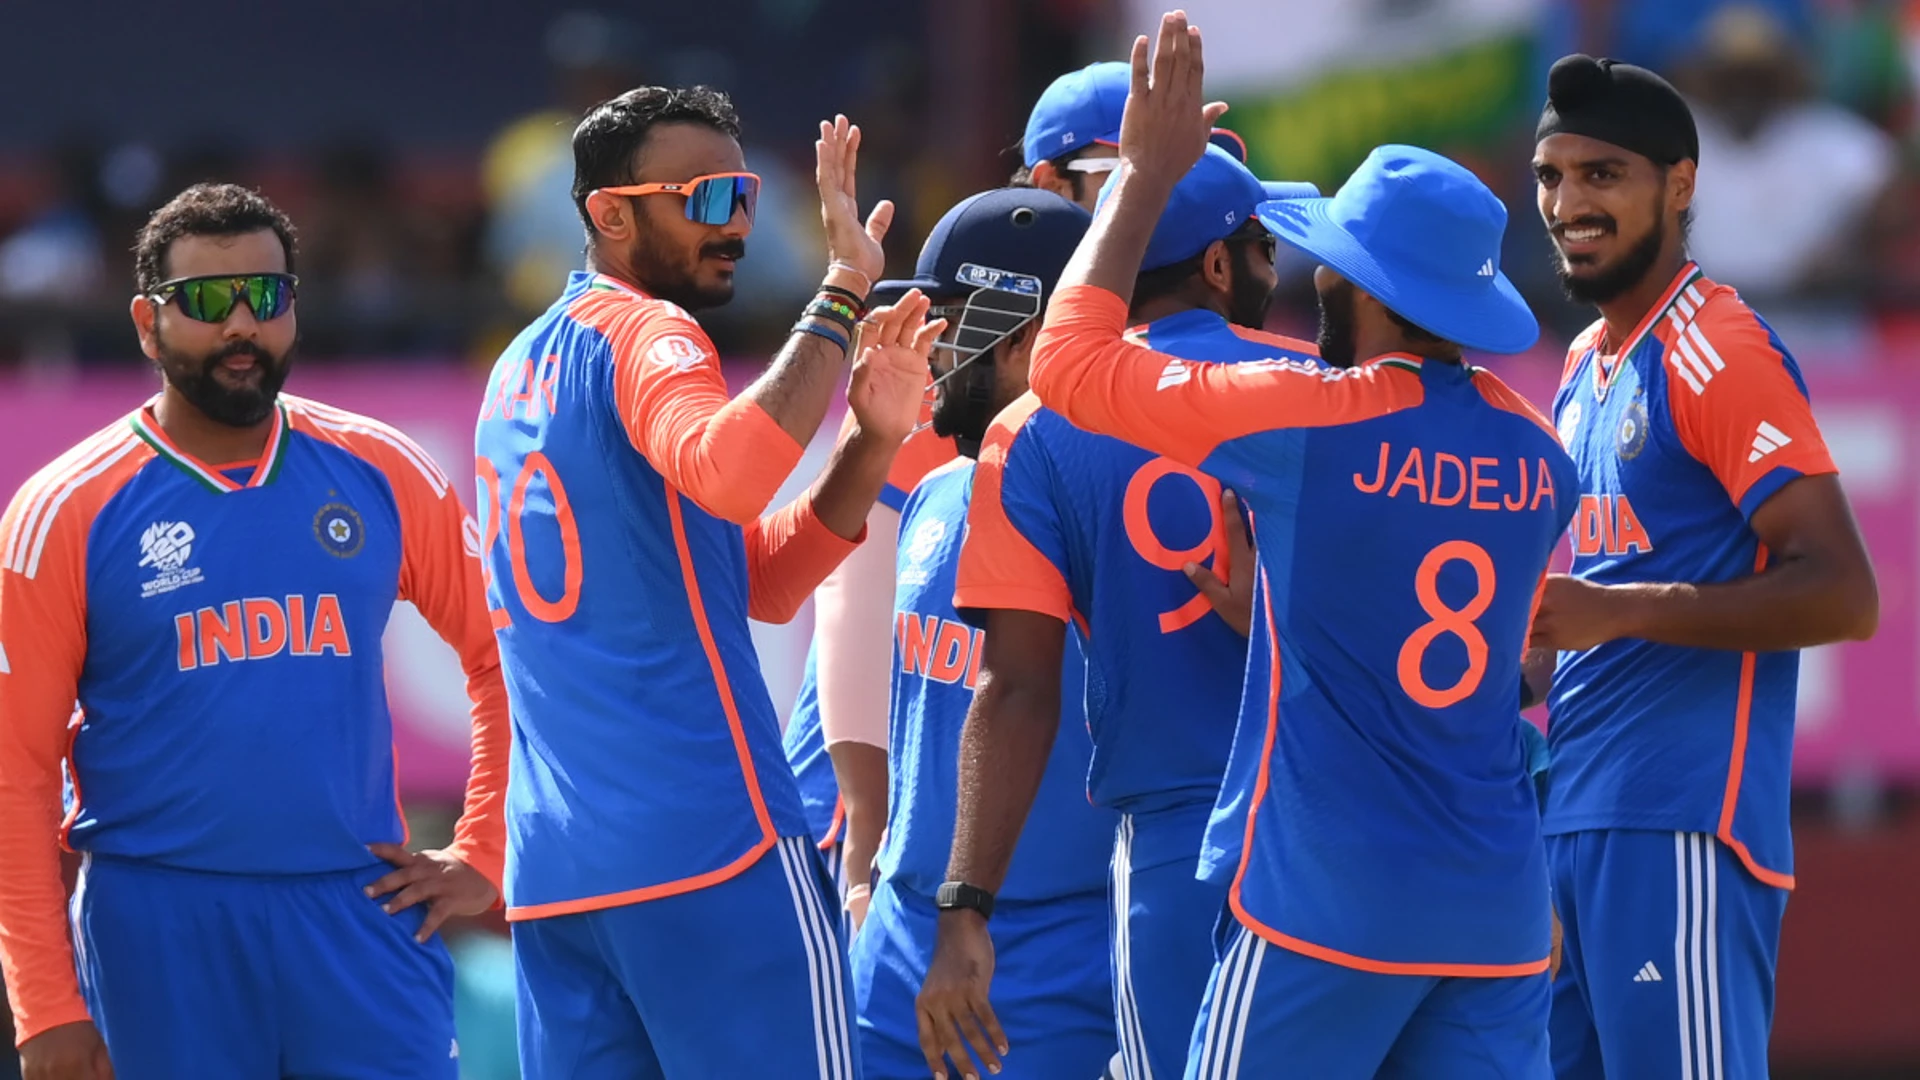 India rout England to set up T20 World Cup final with Proteas